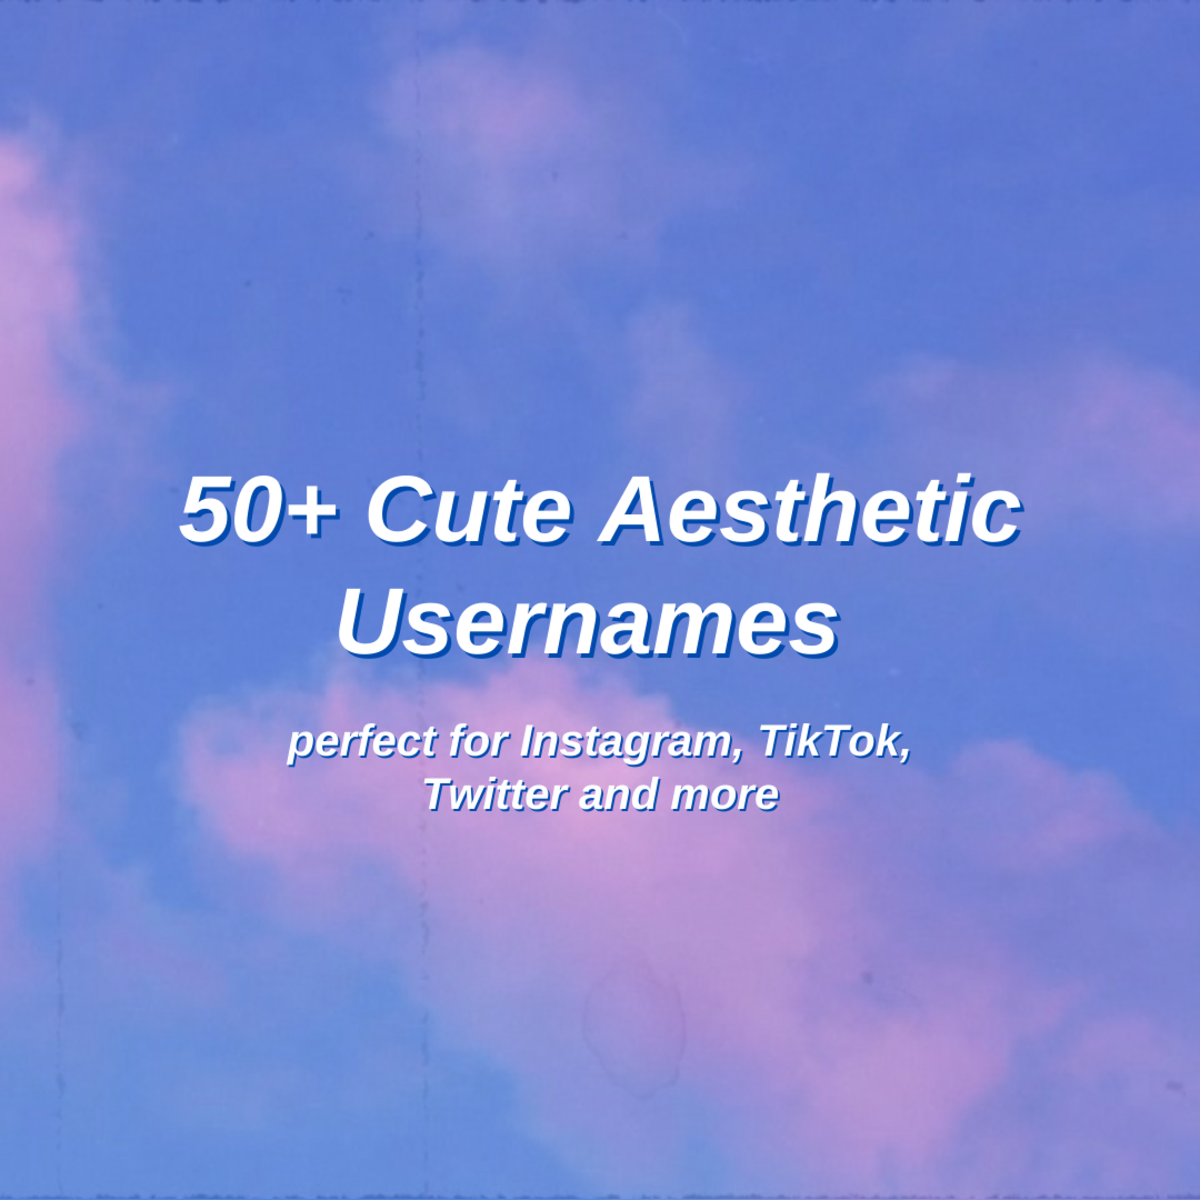 50+ Cute Aesthetic Usernames and Ideas: The Ultimate List